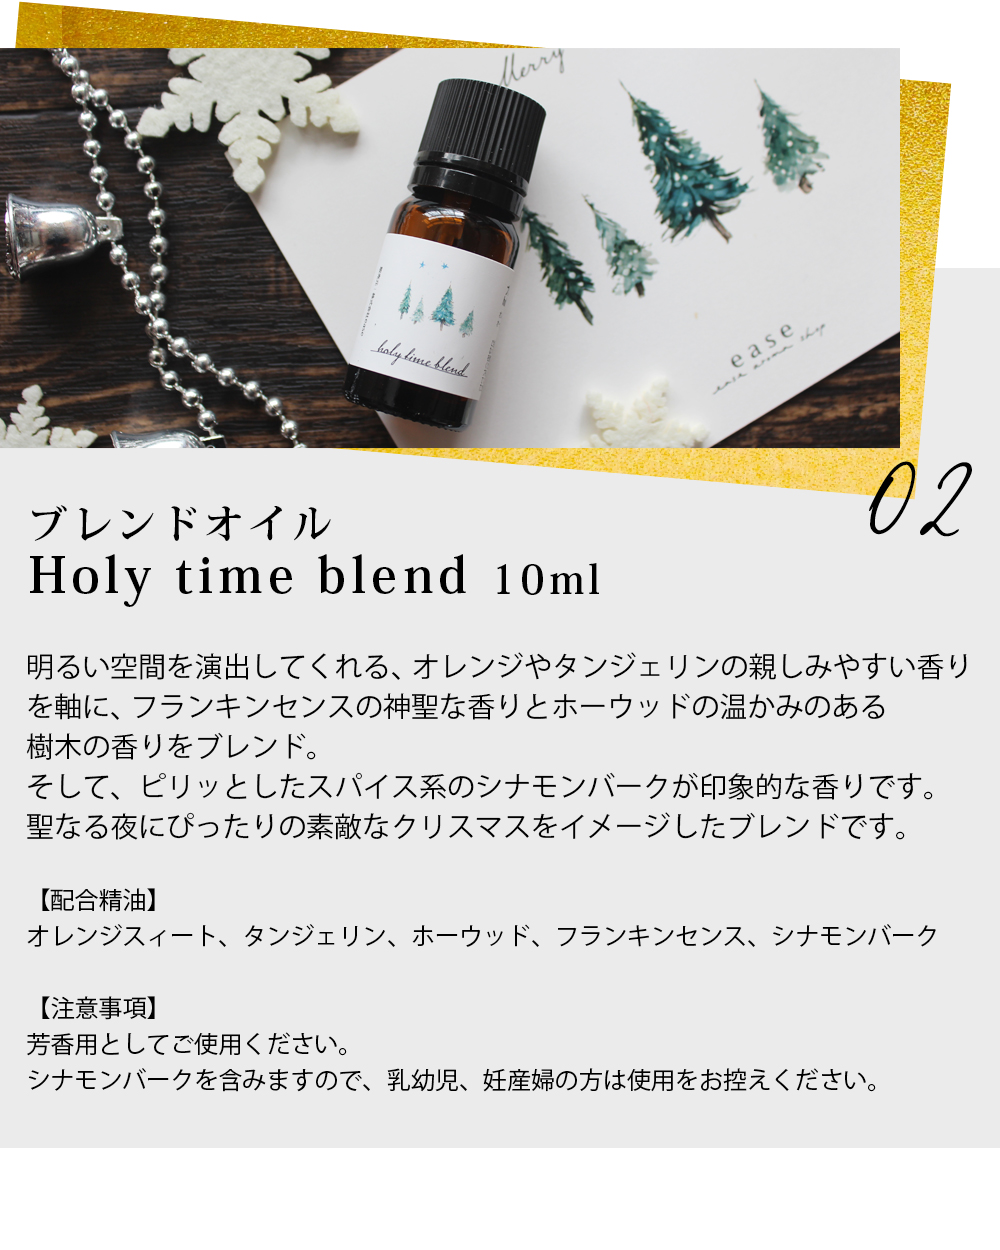 Holy time bend 10ml